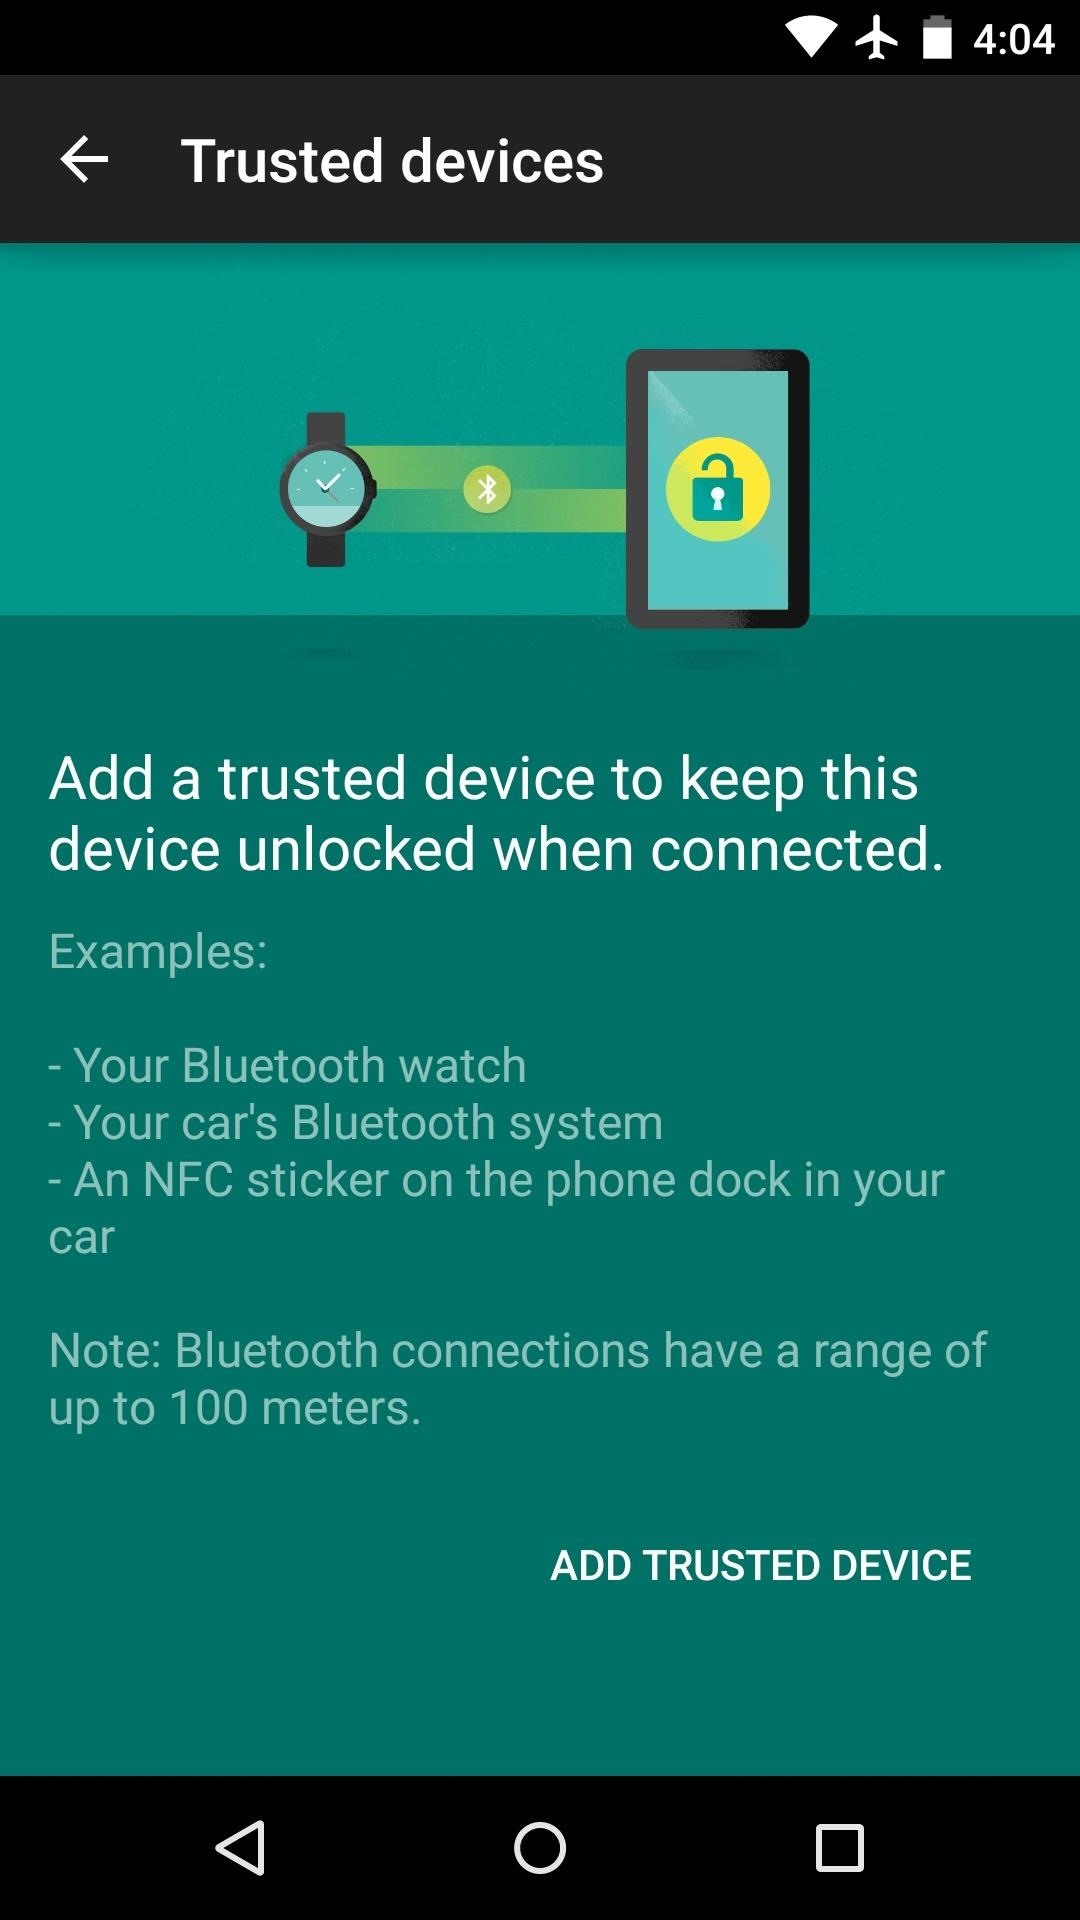 Android Security: 13 Must-Know Tips for Keeping Your Phone Secure